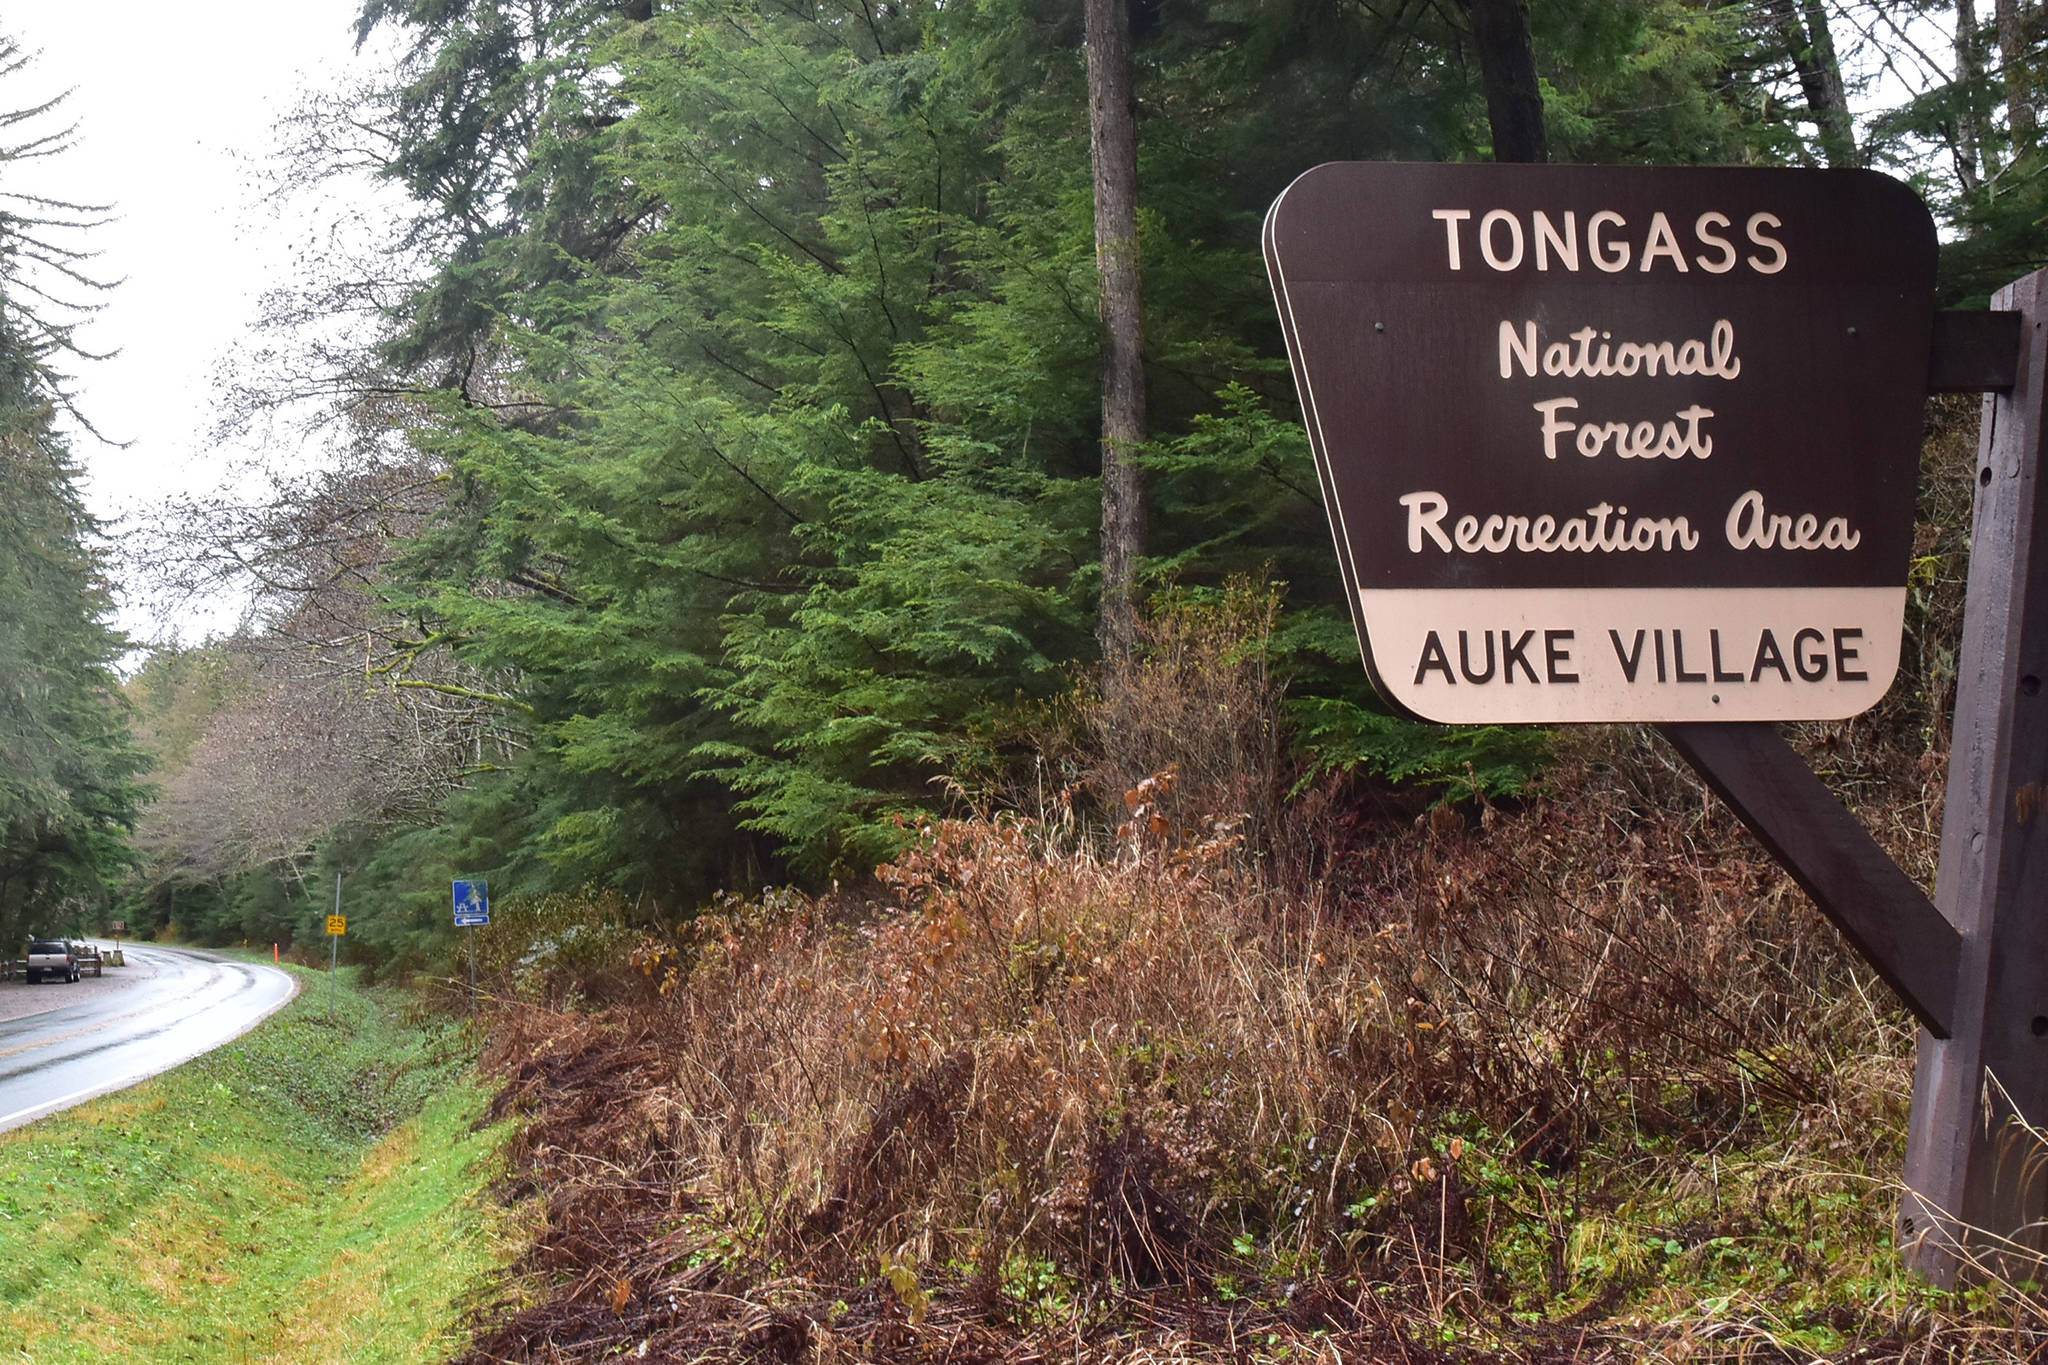 A Tongass National Forest sign stands near the Auke Village Recreation Area. On Wednesday, the United States Department of Agriculture announced its decision to exempt the nation’s largest national forest from the Roadless Rule. Proponents say the rule change will make it easier for responsible resource development while critics say it removes essential protections on critical environments. (Peter Segall / Juneau Empire)